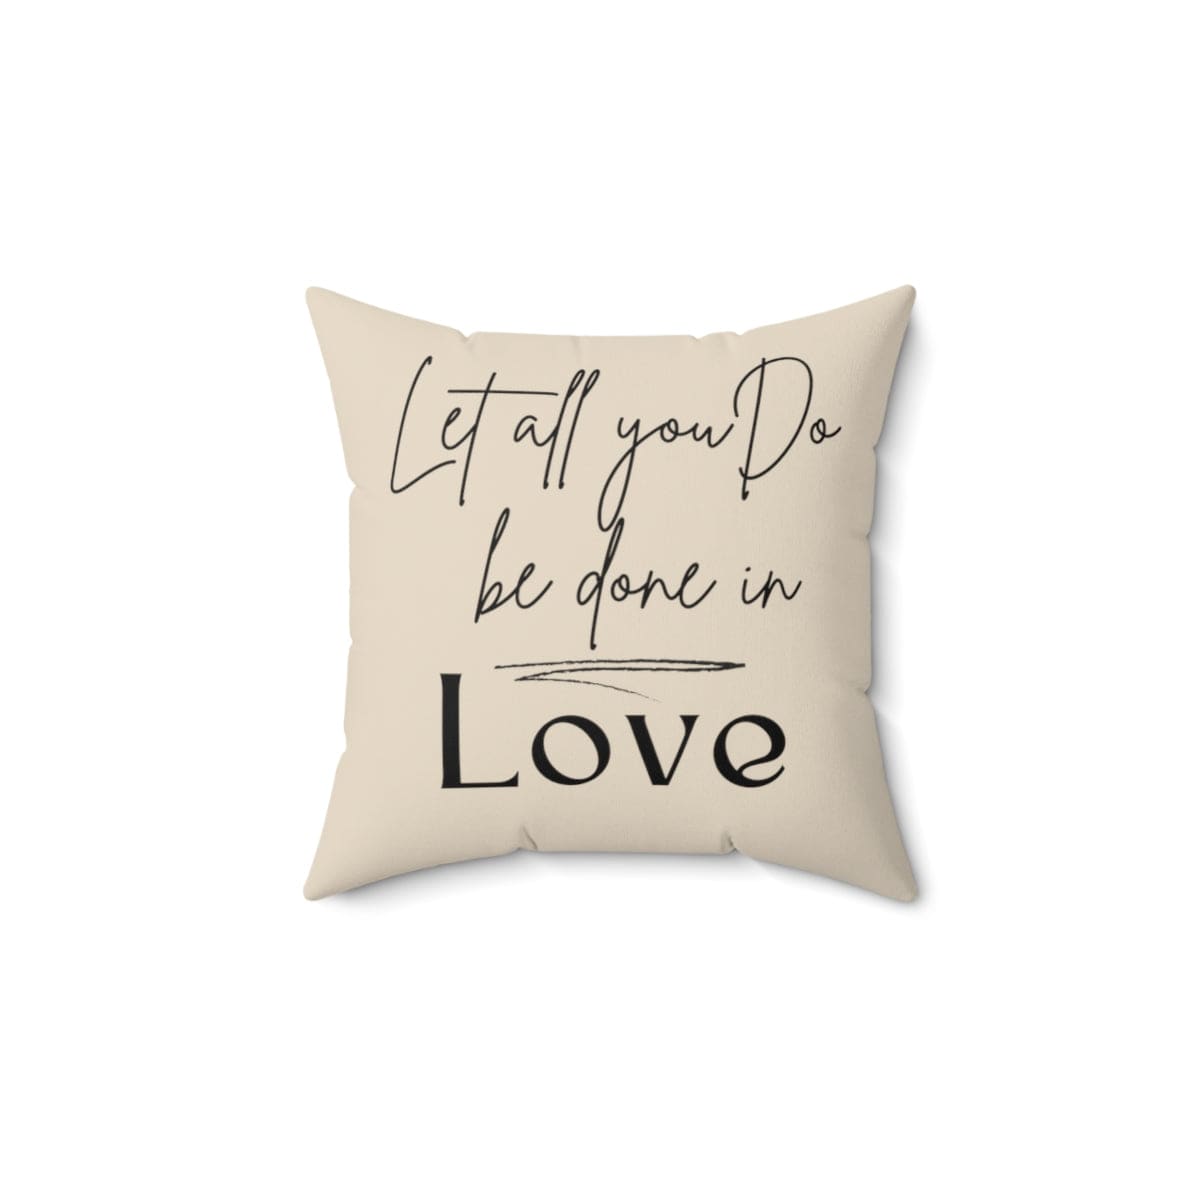 Decorative Throw Pillow Case Let All You Do Be Done In Love Print - Decorative